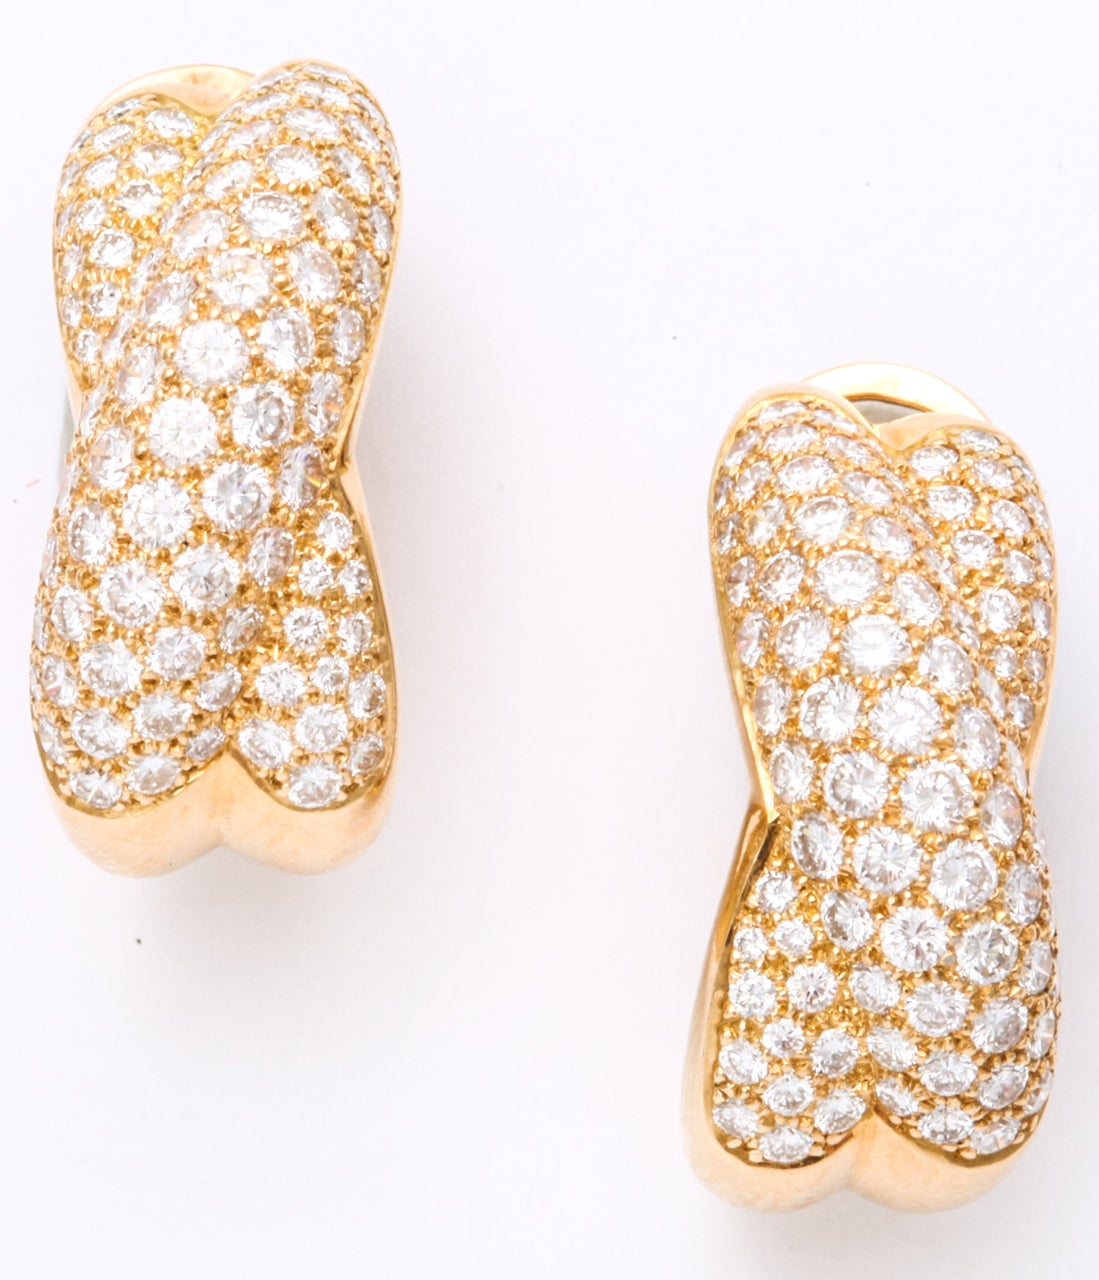 Authentic CARTIER Gold Diamond Crossed Omega Earrings.  Total weight of diamonds - 6 carats approximately. 
Length - 1